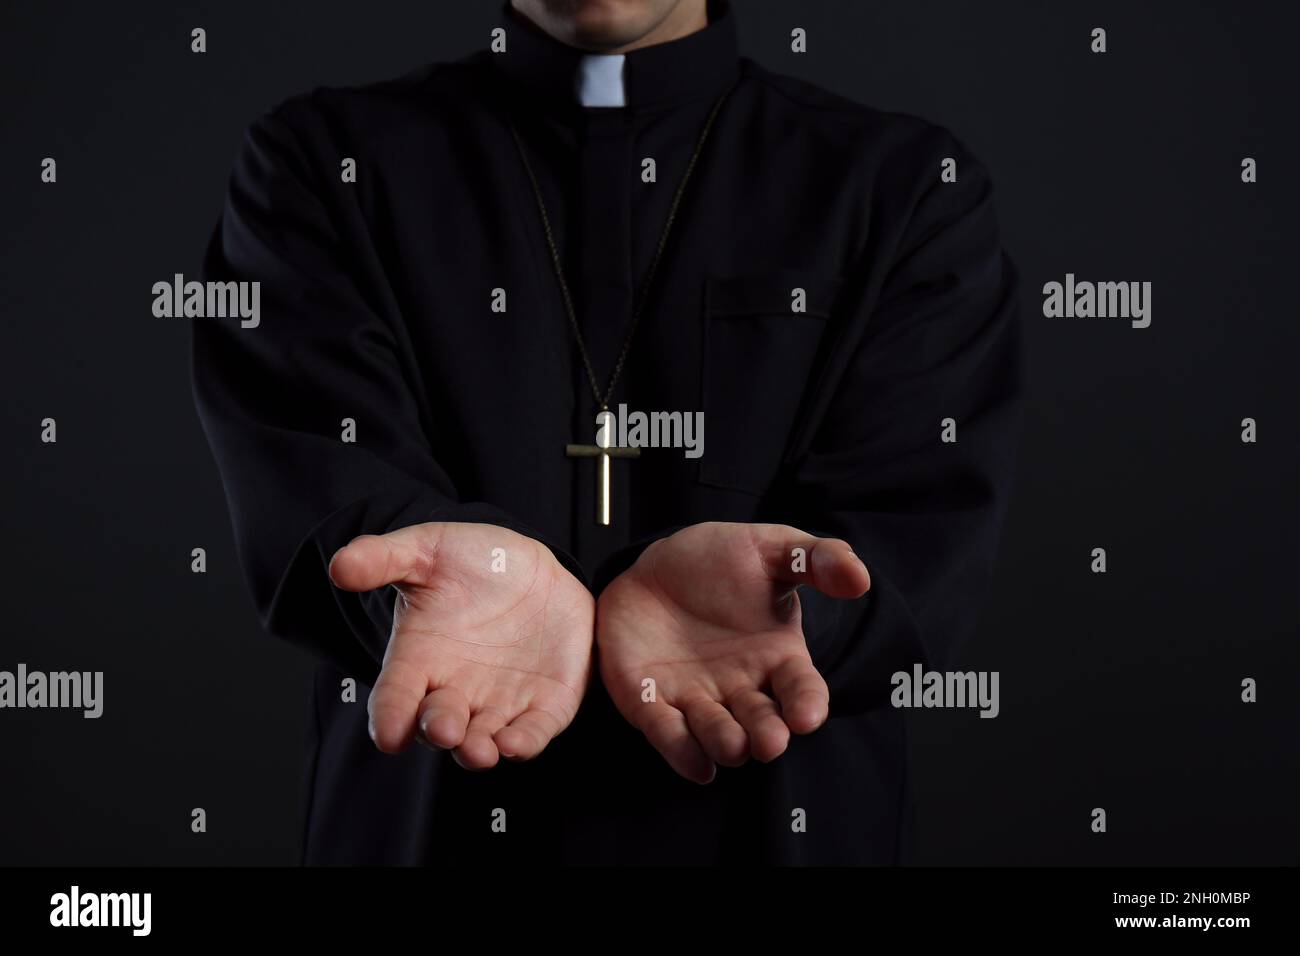 Priest reaching out his hands on black background, closeup Stock Photo